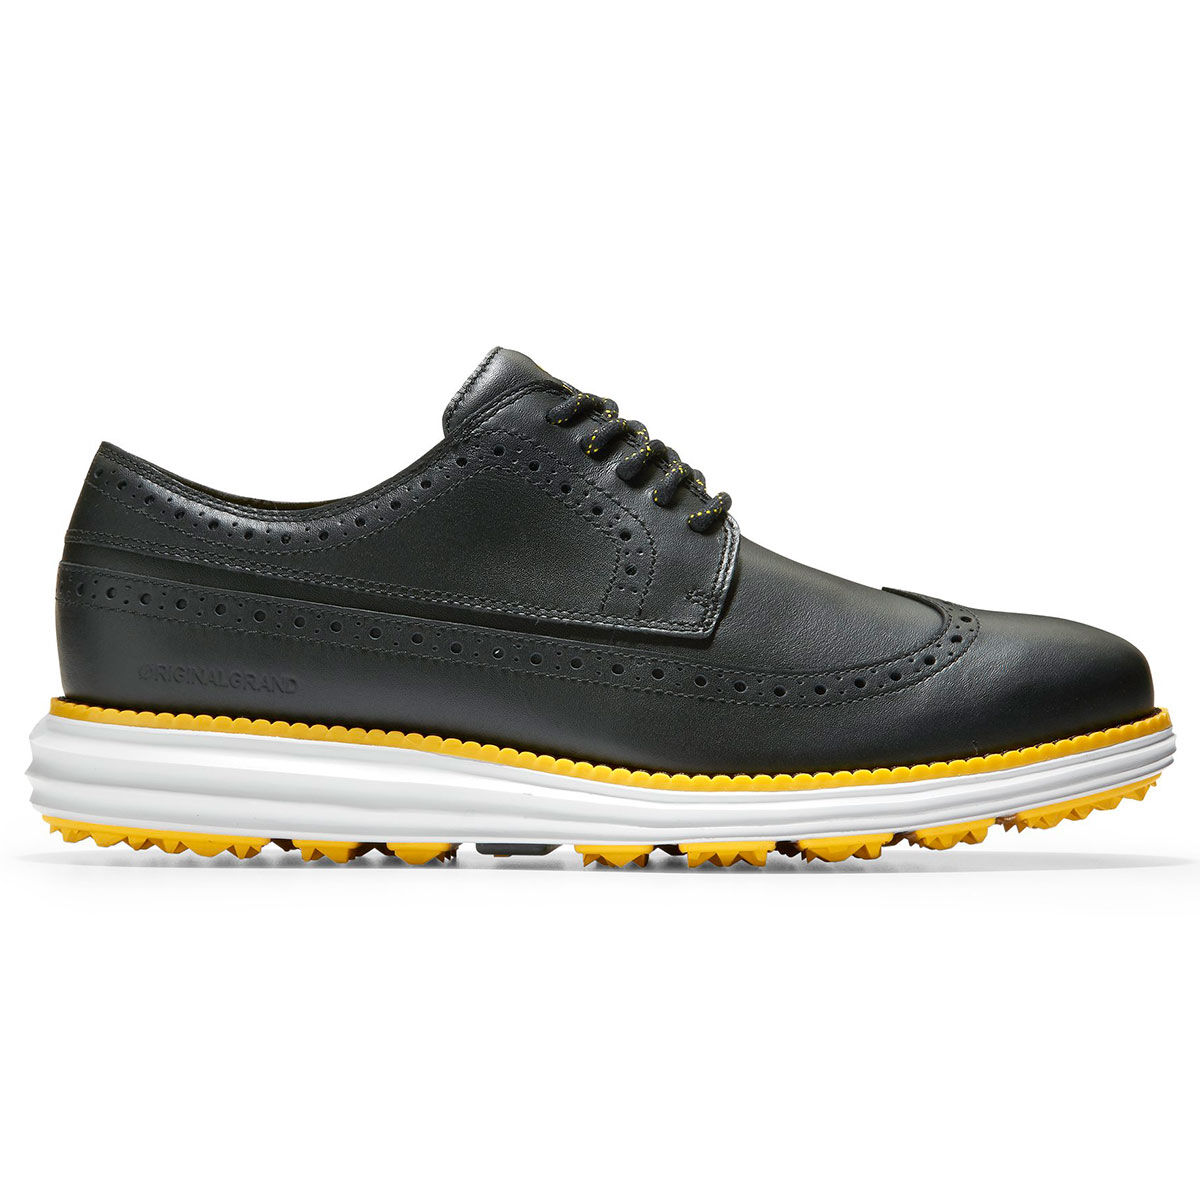 Cole Haan Men’s OriginalGrand Wing Oxford Spikeless Golf Shoes, Mens, Black/white, 8 | American Golf